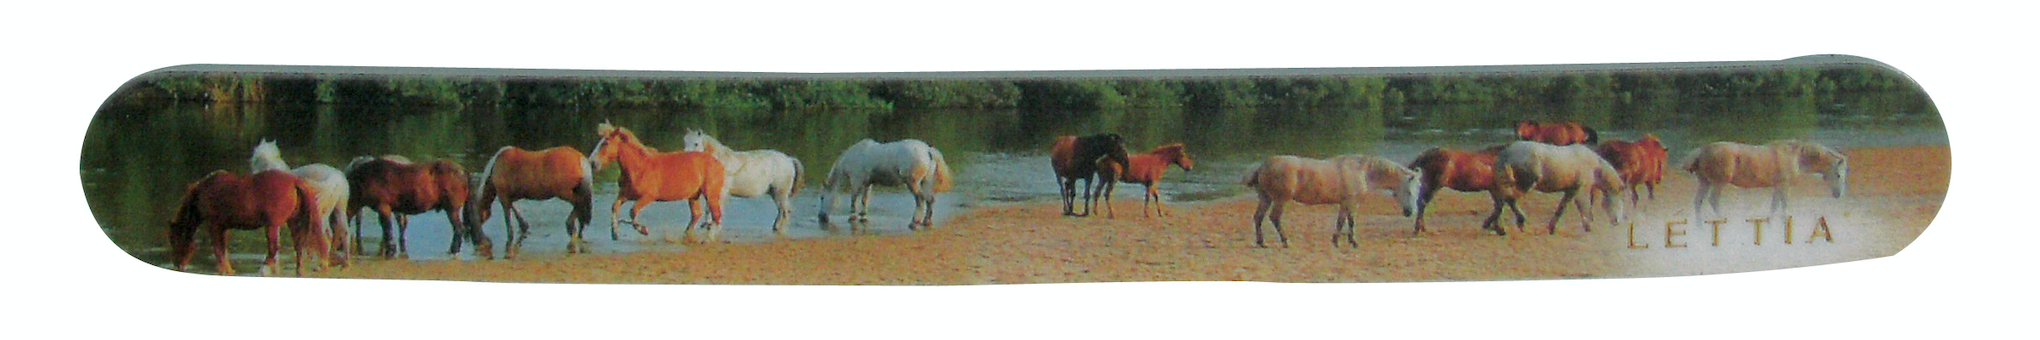 Lettia Horses By The River Nail File